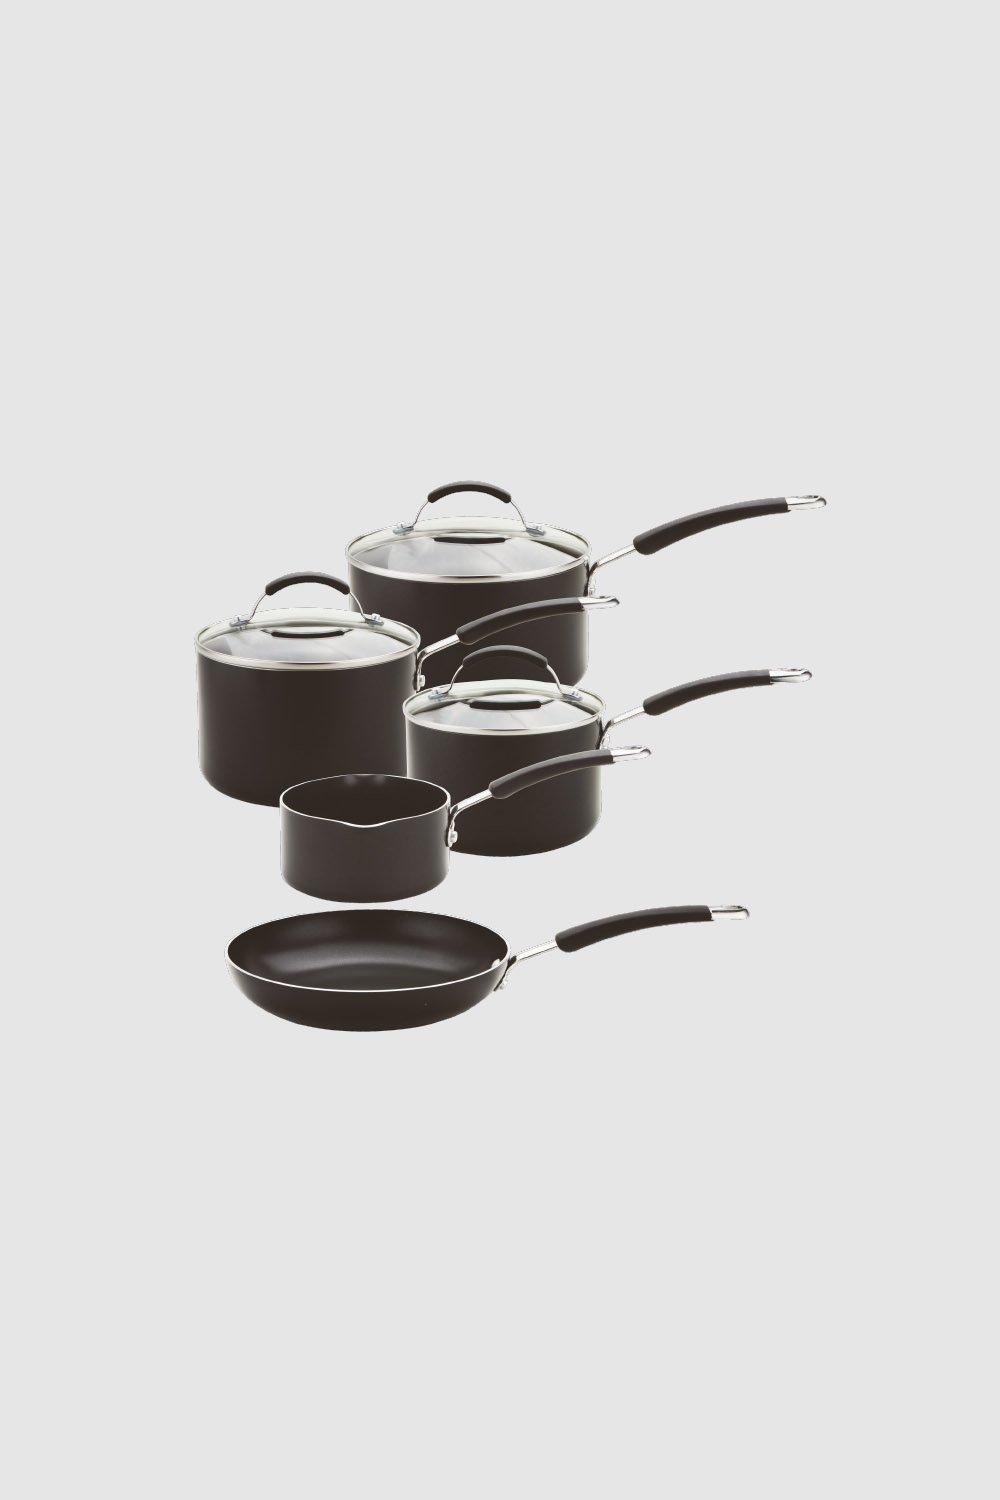 5 Piece Induction Cookware Set non Stick, Oven and Dishwasher Safe, Aluminium, Black